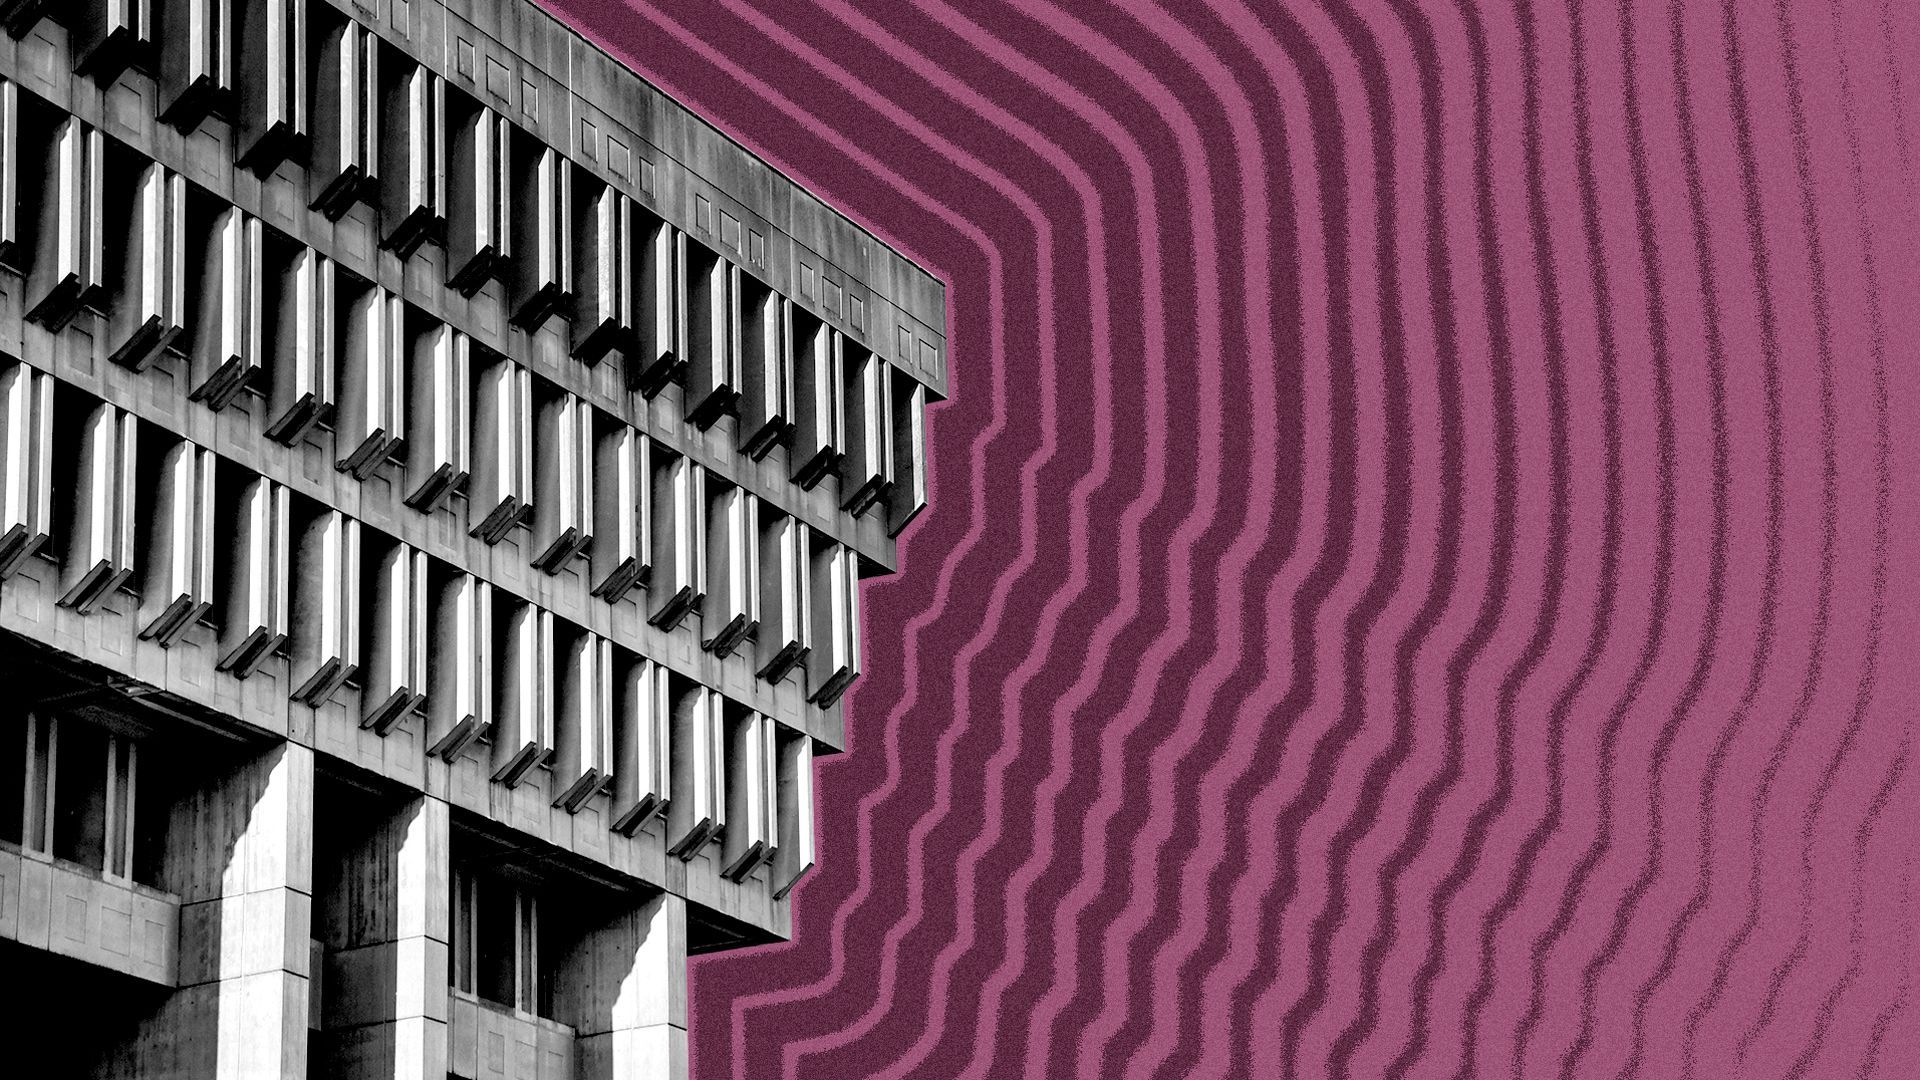 Illustration of Boston City Hall with lines radiating from it.